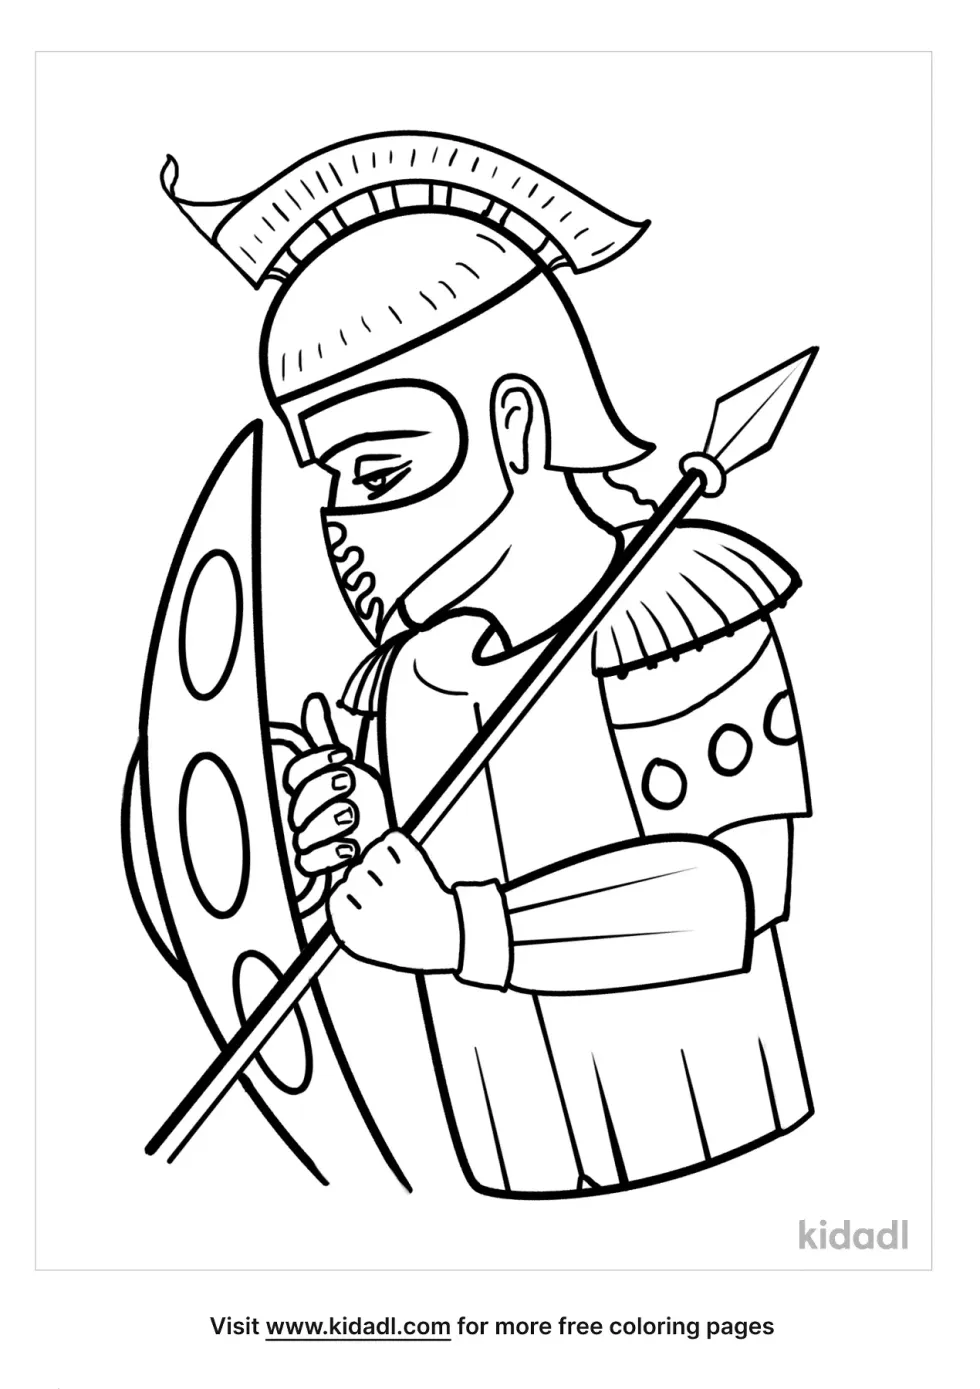 Ares Coloring Page